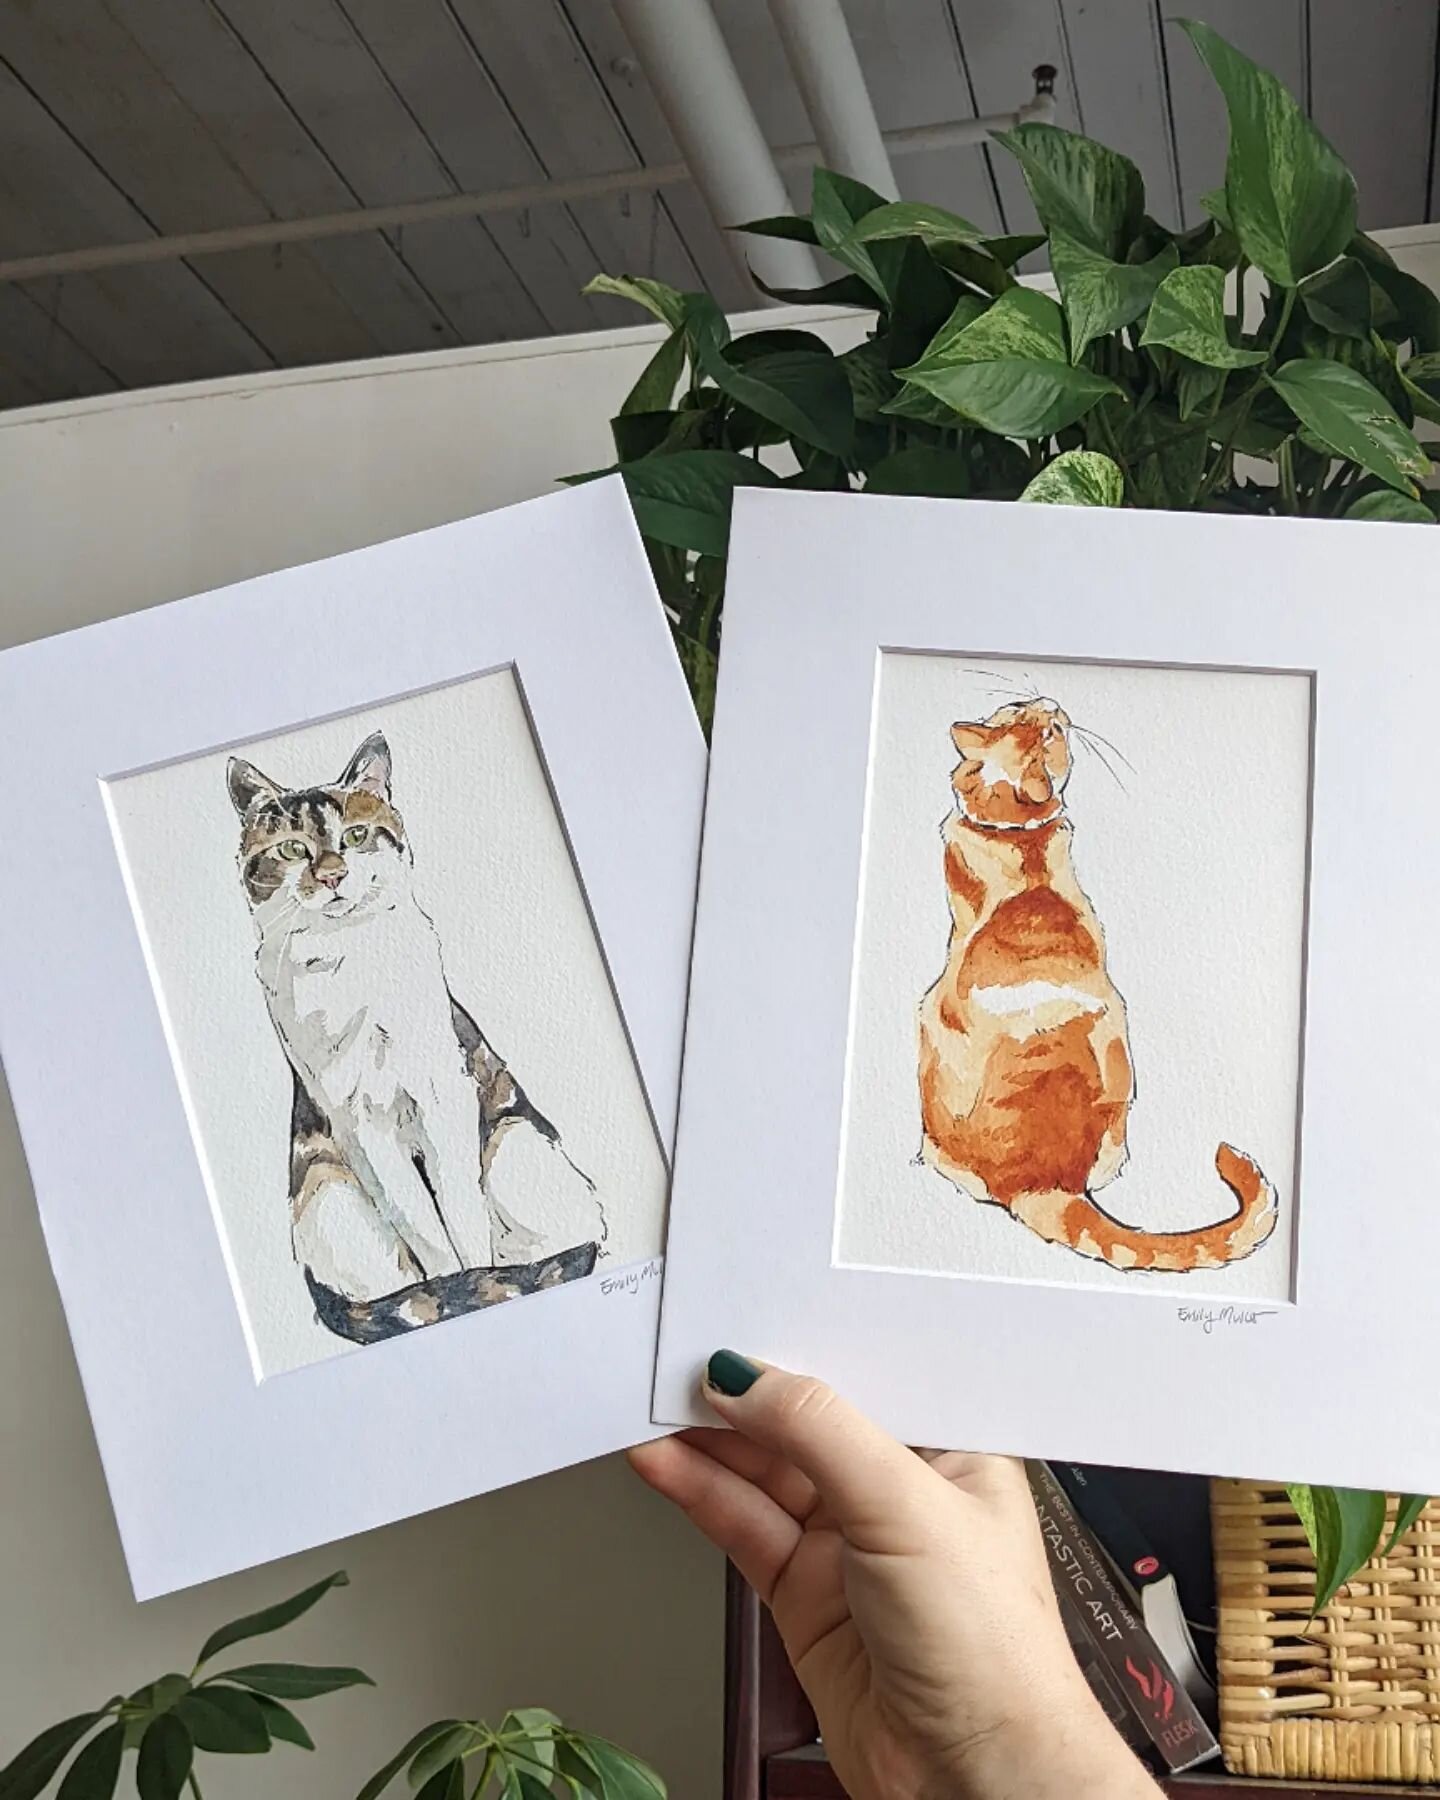 Some feline friends to add to the watercolor collection! What pet should I do next?

Both of these friends are for sale to a good home! (And many more as well!) Follow the link to my Etsy shop in my bio to find out more 🐈✨

#illustration #watercolor